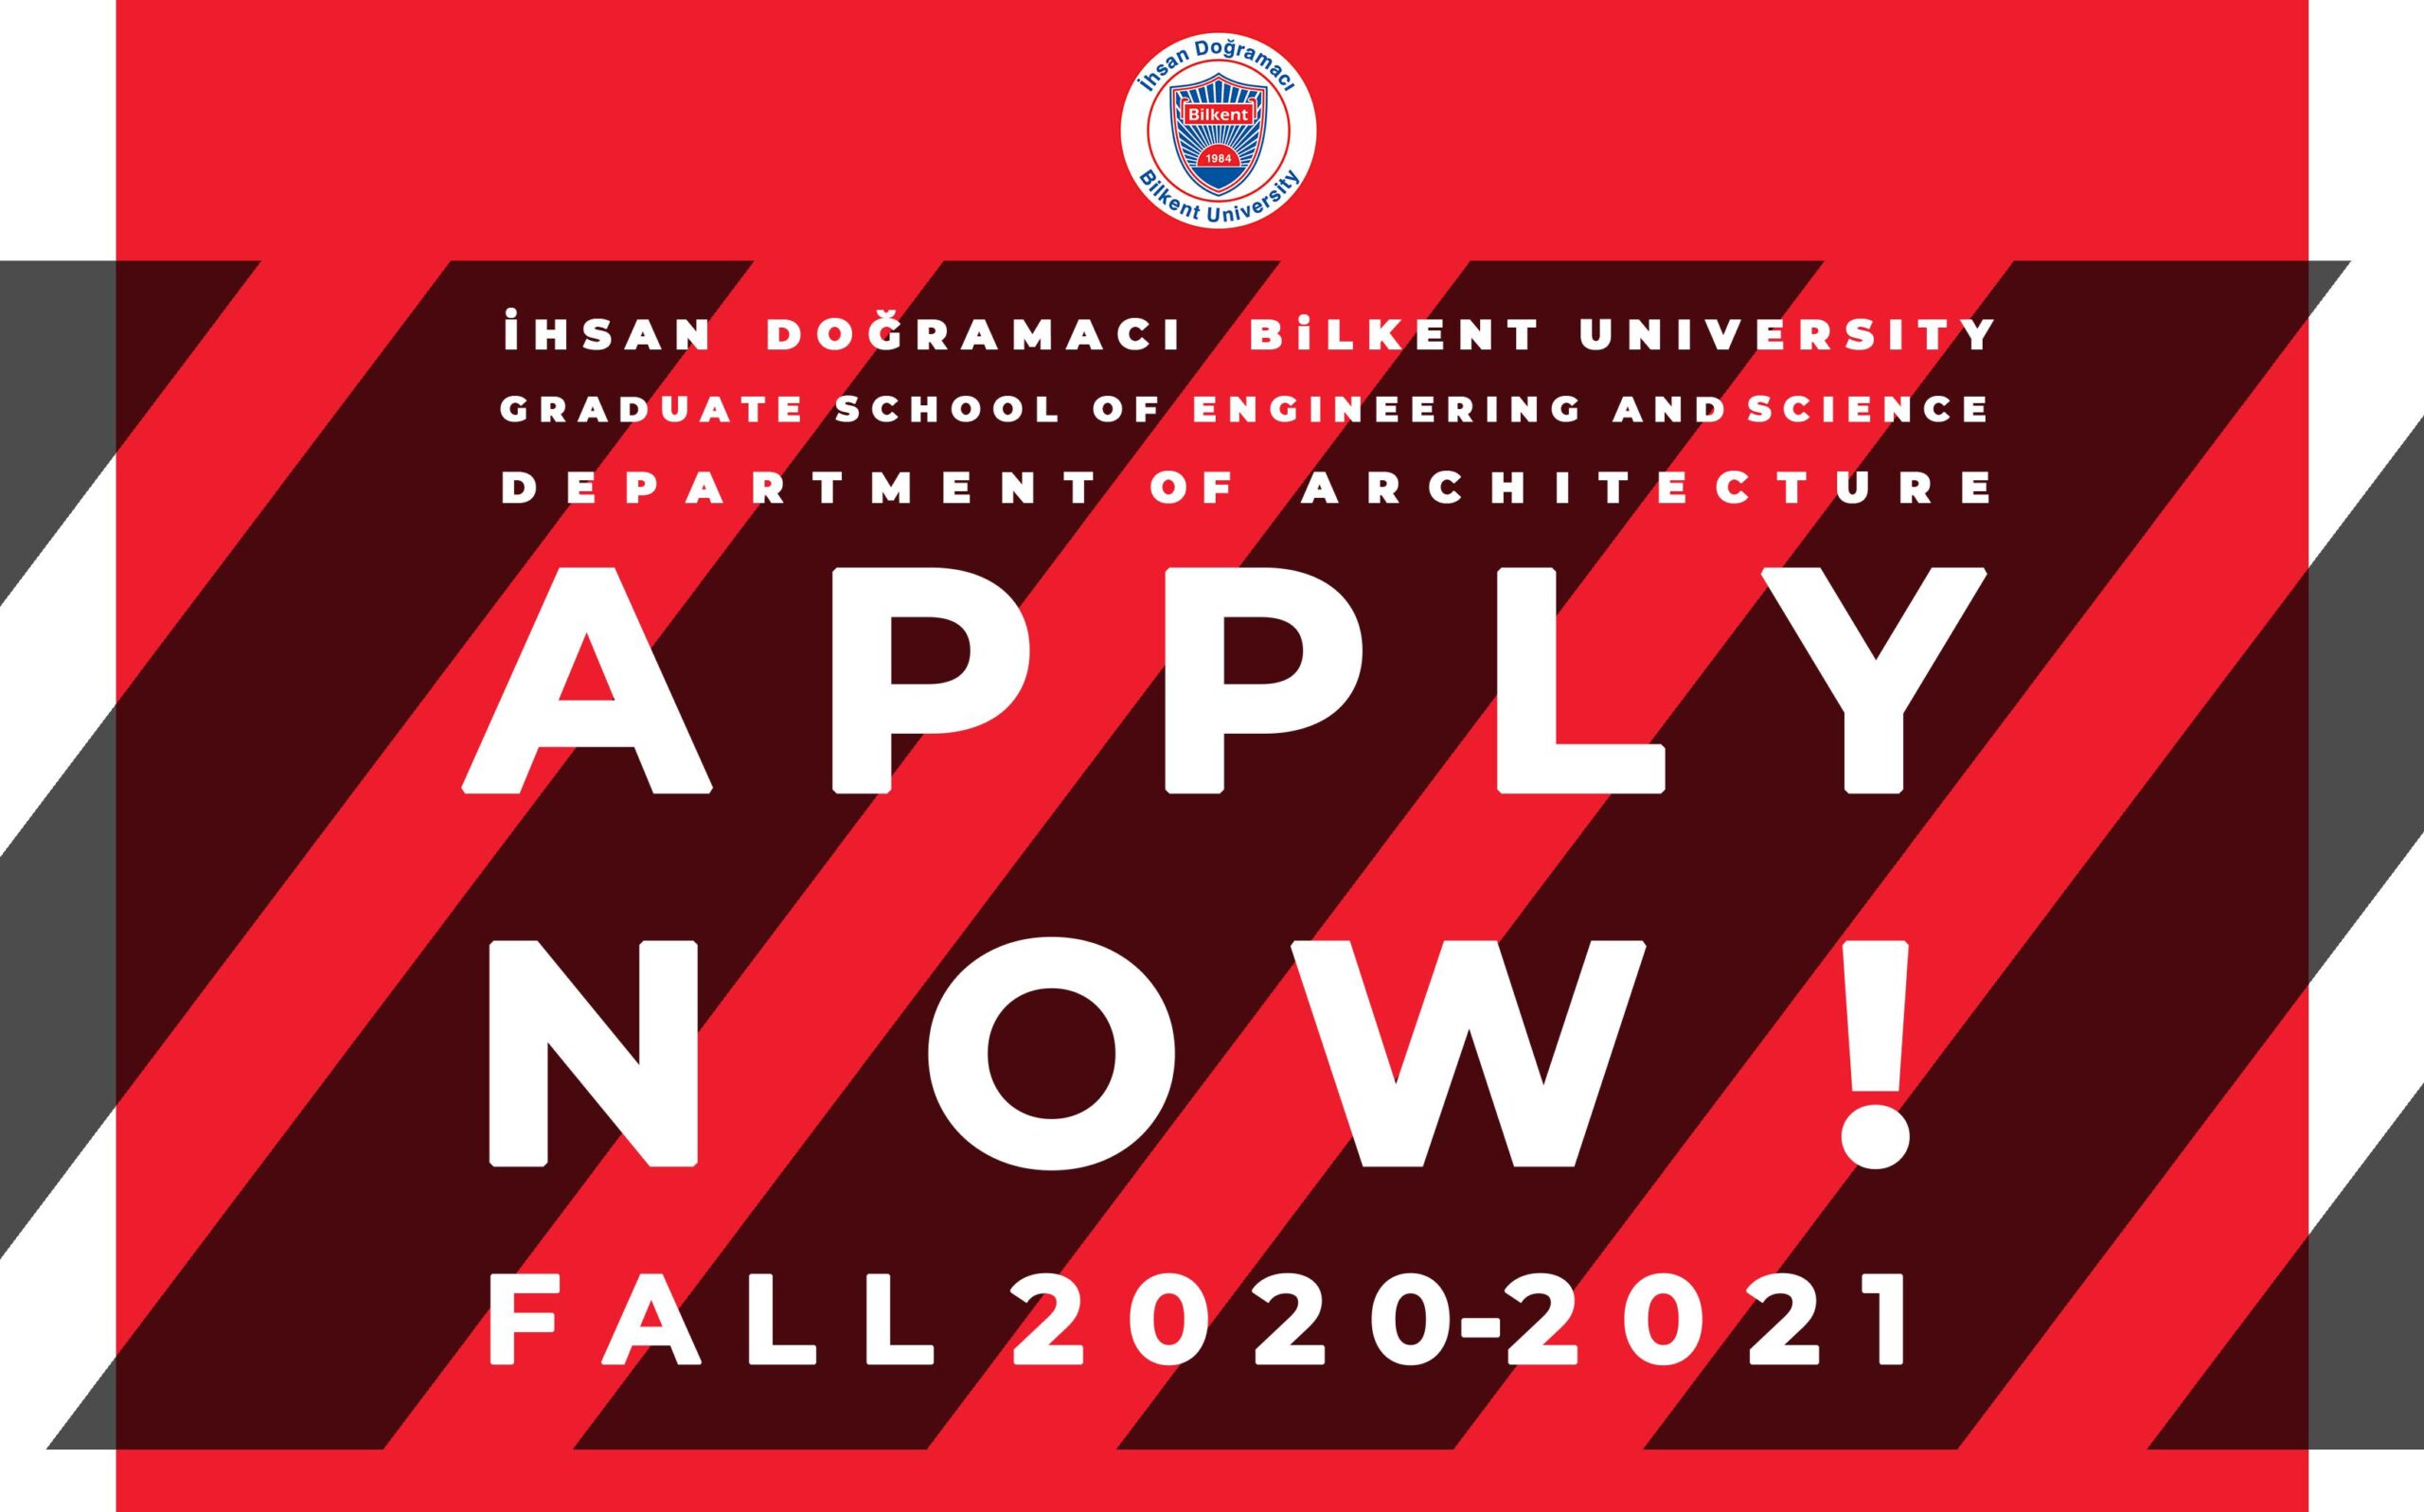 VIRTUAL OPEN HOUSE for GRADUATE STUDIES in ARCHITECTURE